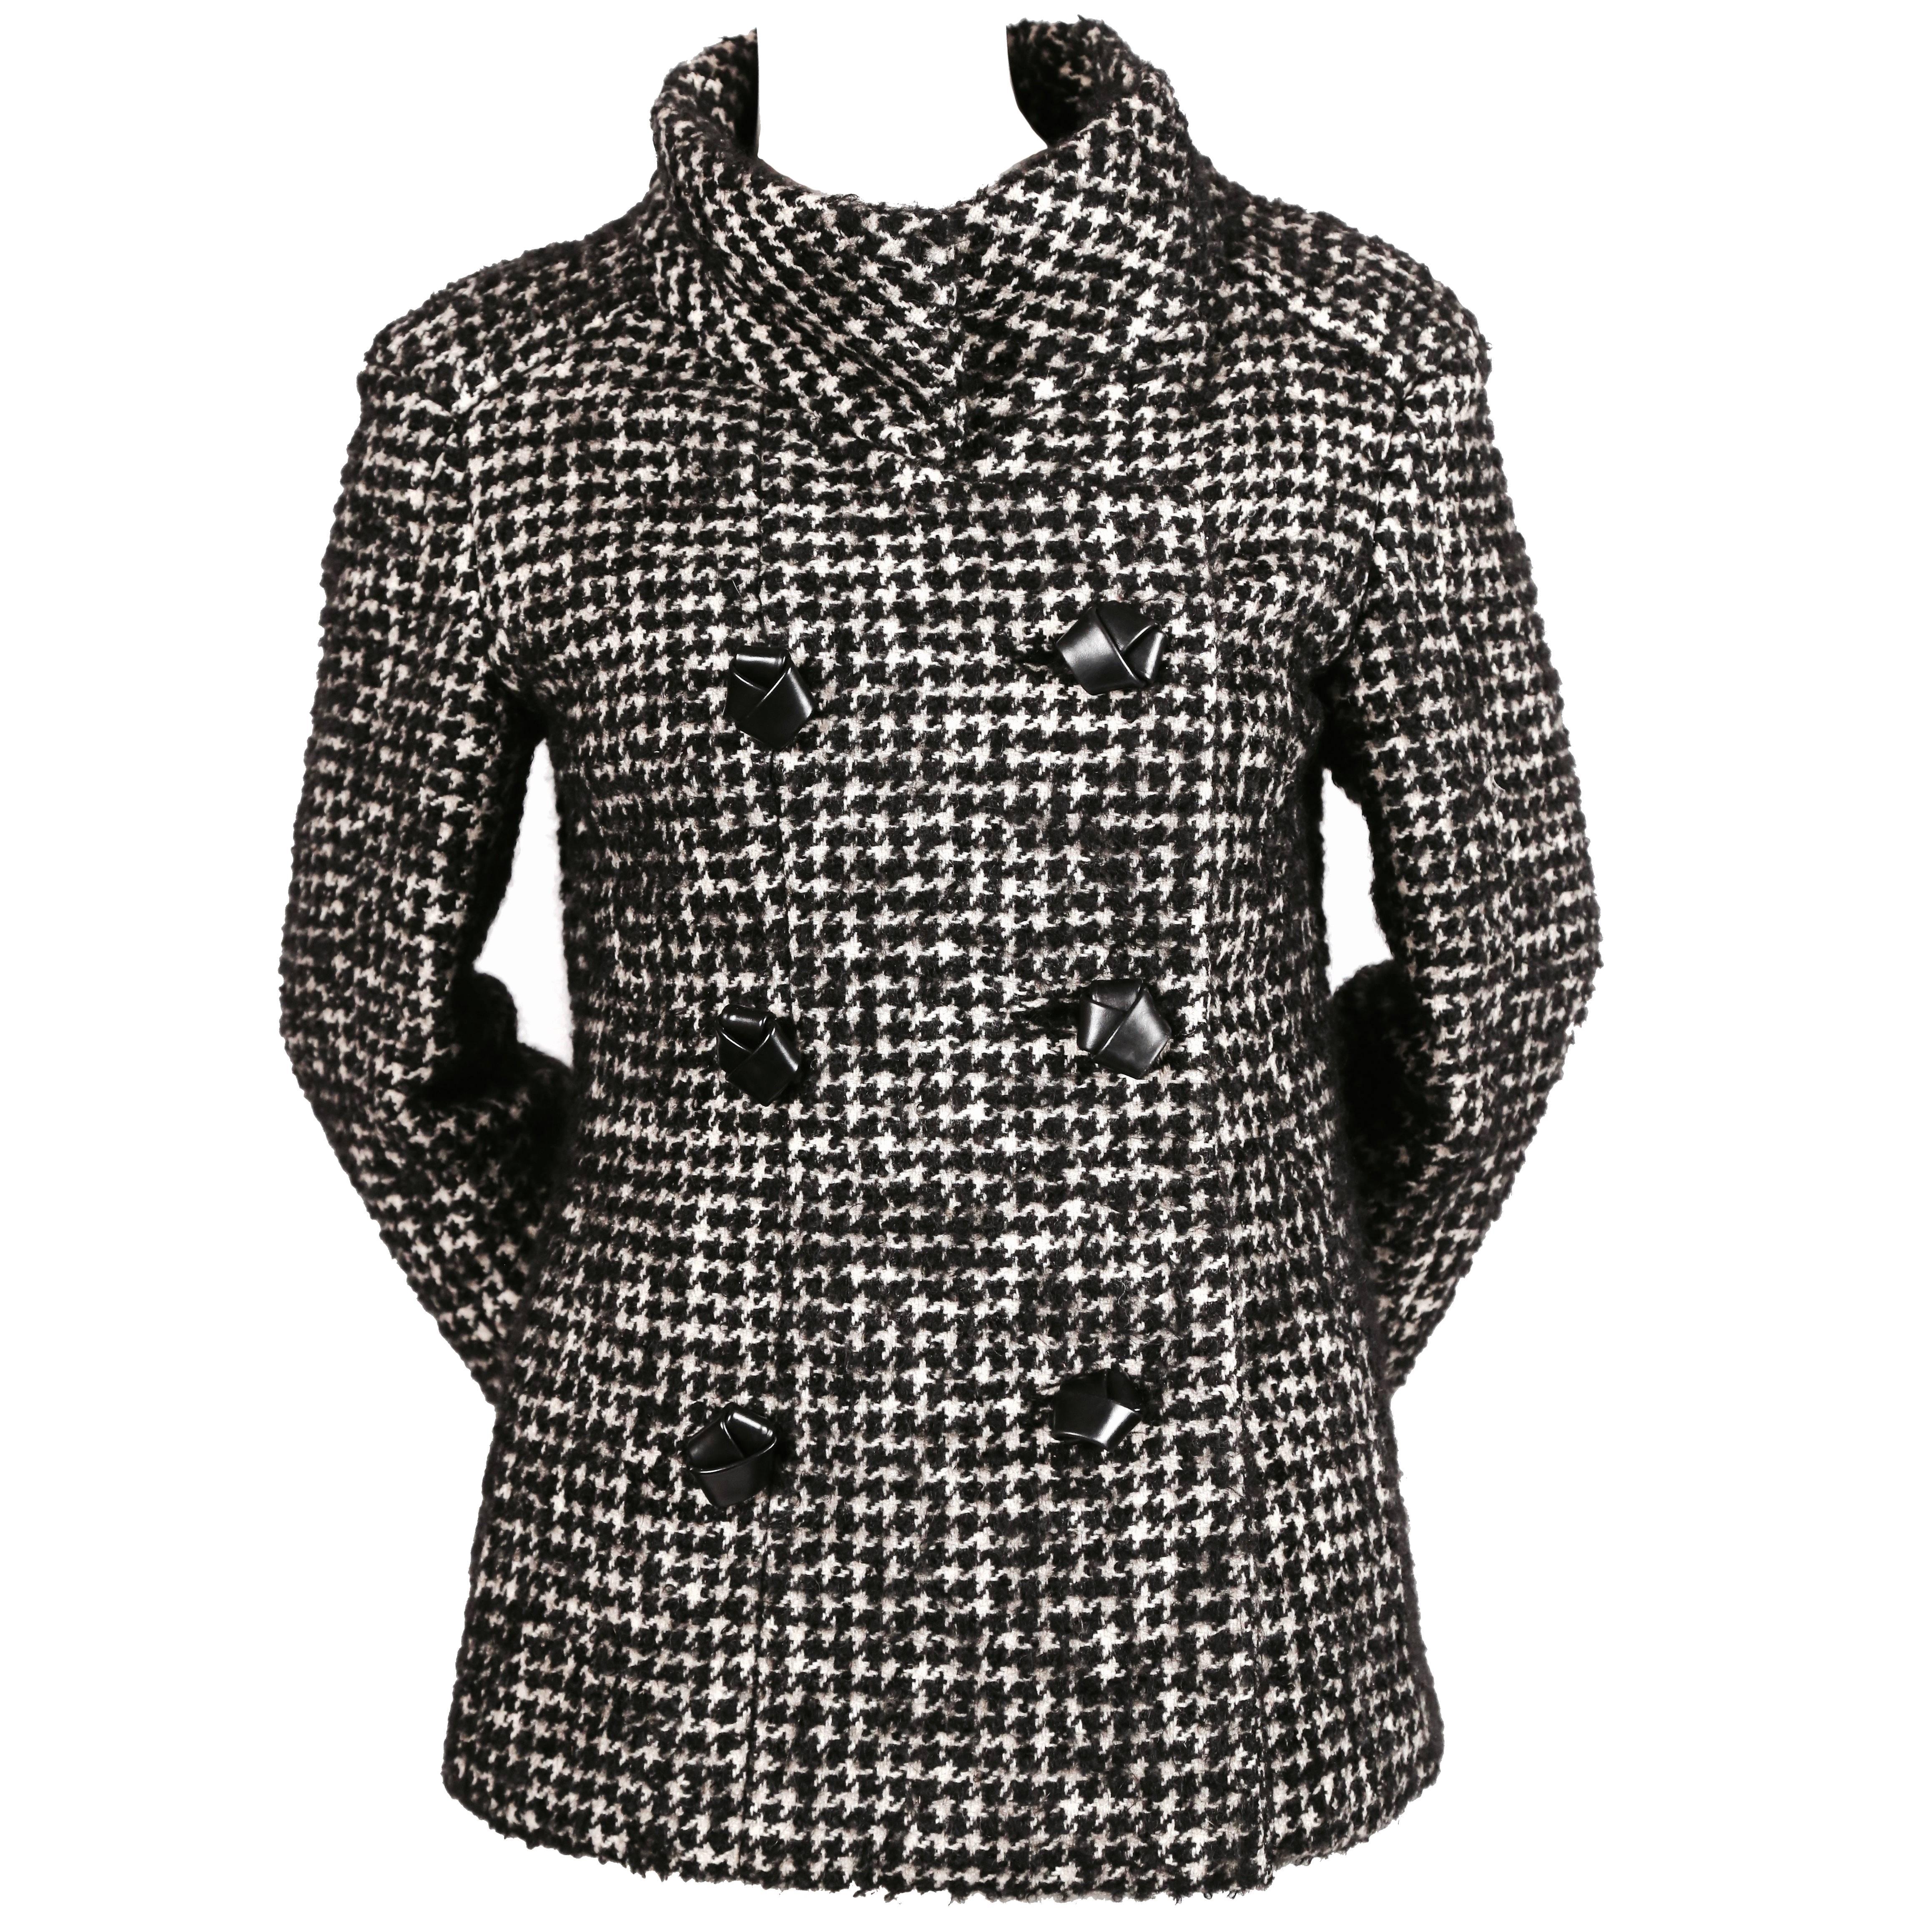 1960's JAMES GALANOS houndstooth wool jacket with 'knotted' leather buttons